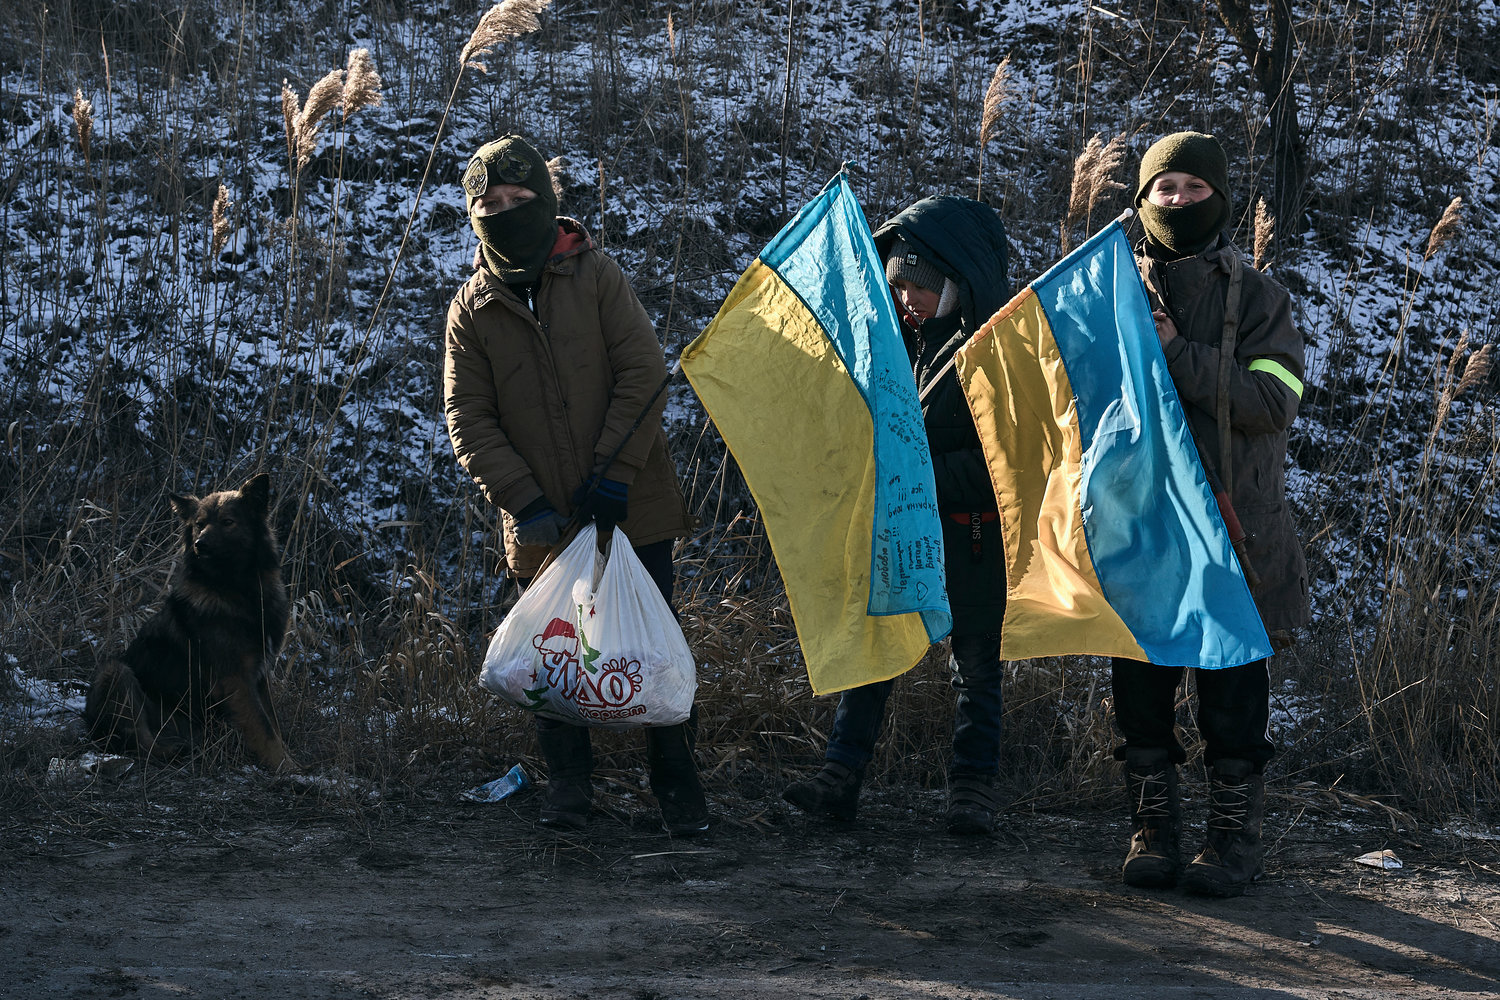 Ukrainian children hold national flags as they stand guard at an improvised checkpoint close to Sloviansk, Donetsk region, Ukraine, Wednesday, Jan. 11, 2023.